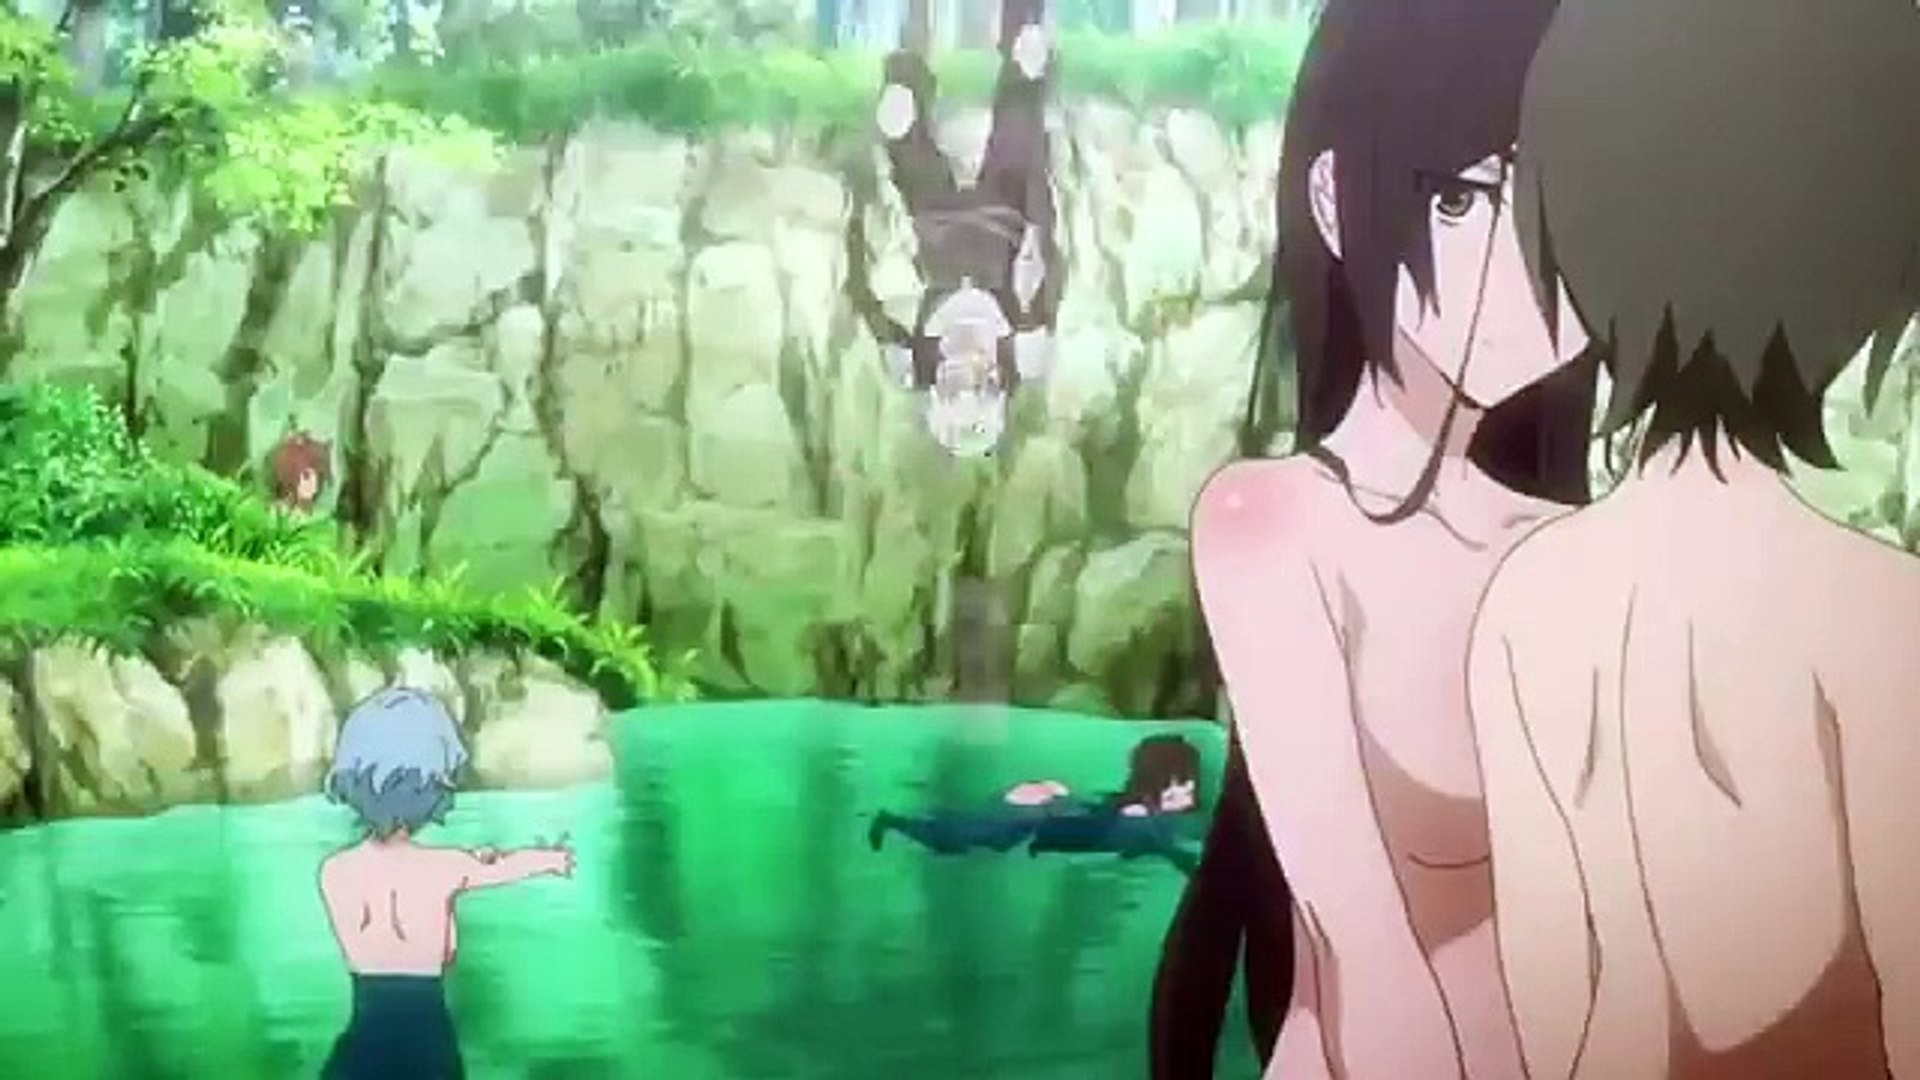 Anime hot scence